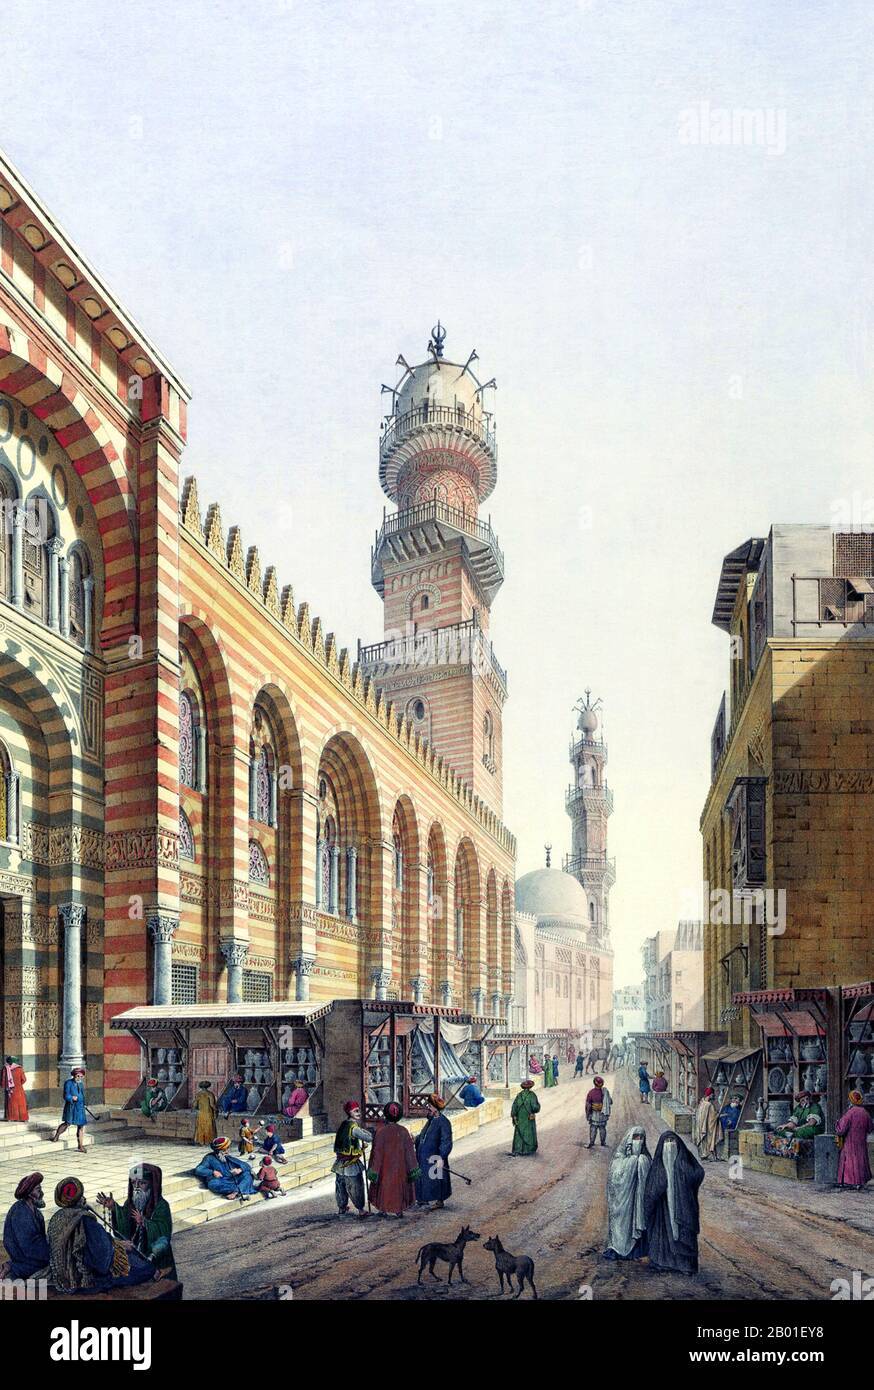 Egypt: View of the Sultan al-Mansur ibn Qala'um Mosque, Cairo. Painting by Pascal Coste (26 November 1787 - 8 February 1879), c. 1829.  The Mosque complex of Sultan Qala'un was built along the Shari' el-Muizz in 1284 by Sultan el-Mansur Qala'um. It comprises a mosque, madrasa, a mausoleum and a muristan (which was replaced by a modern hospital in the 1920s). The complex is the earliest example of a new Syrian style of those times, and displays typical Mameluke architecture. Stock Photo